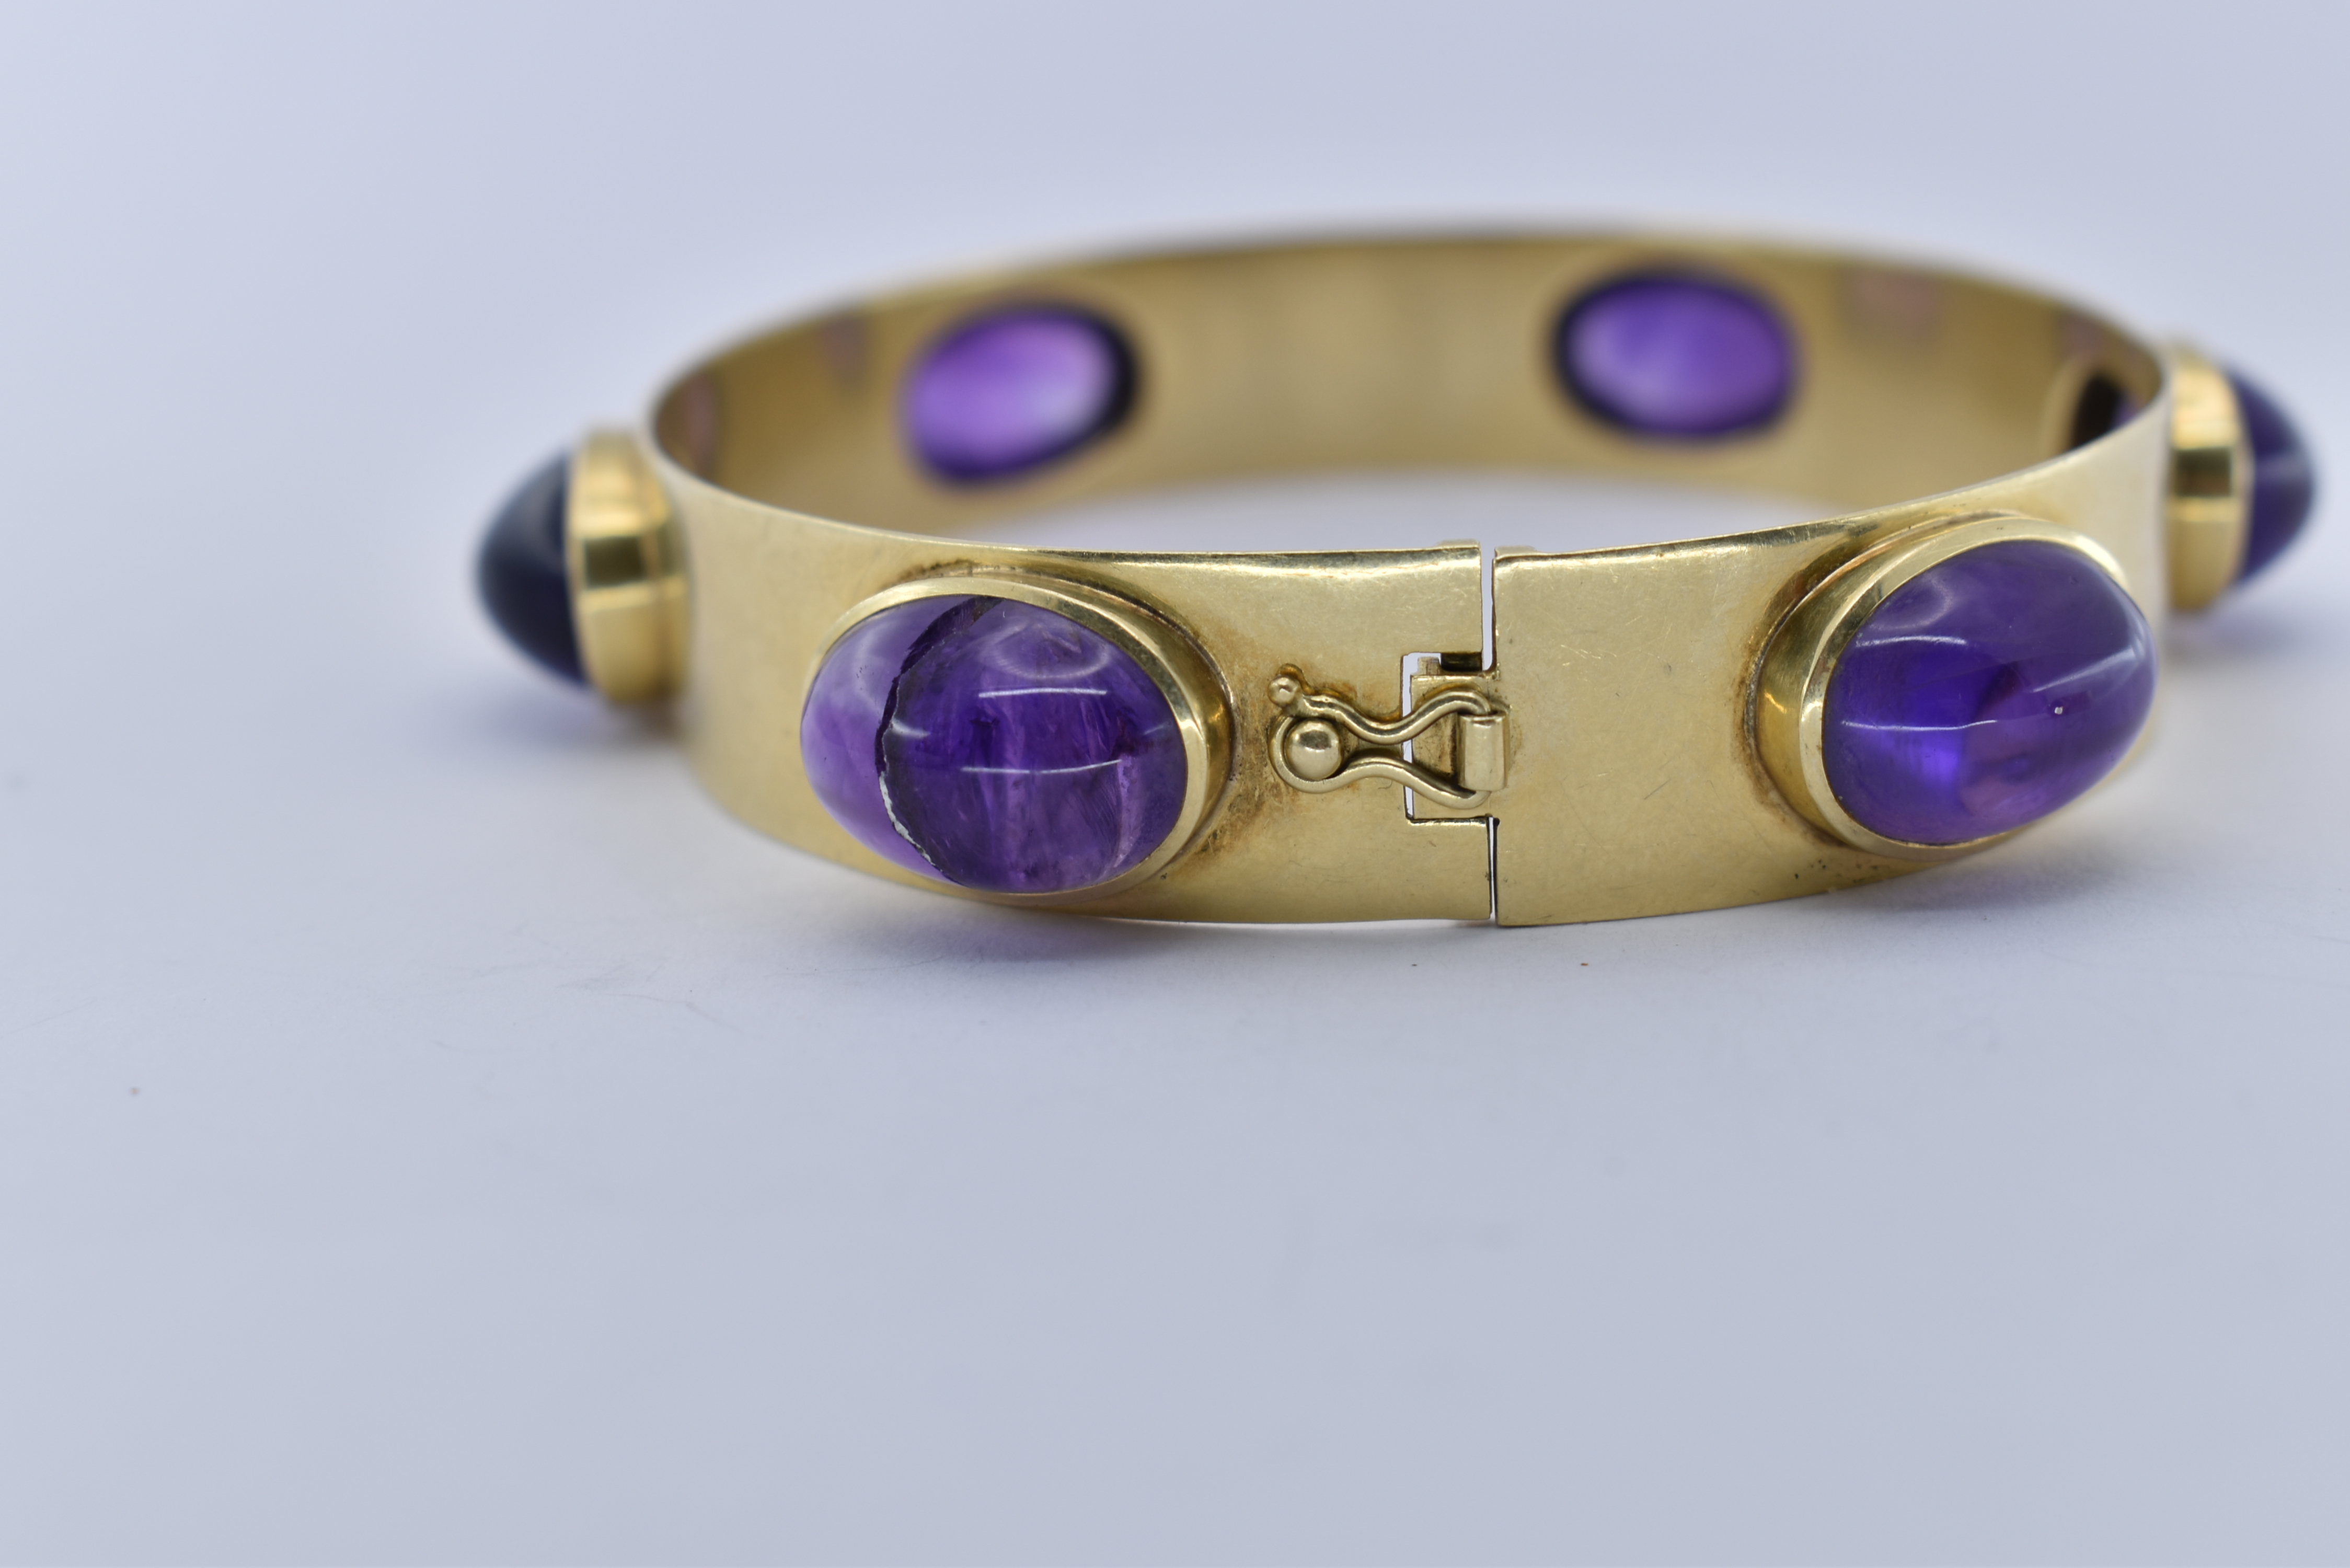 A 14CT GOLD AND AMETHYST BANGLE AND RING SUITE - Image 11 of 14